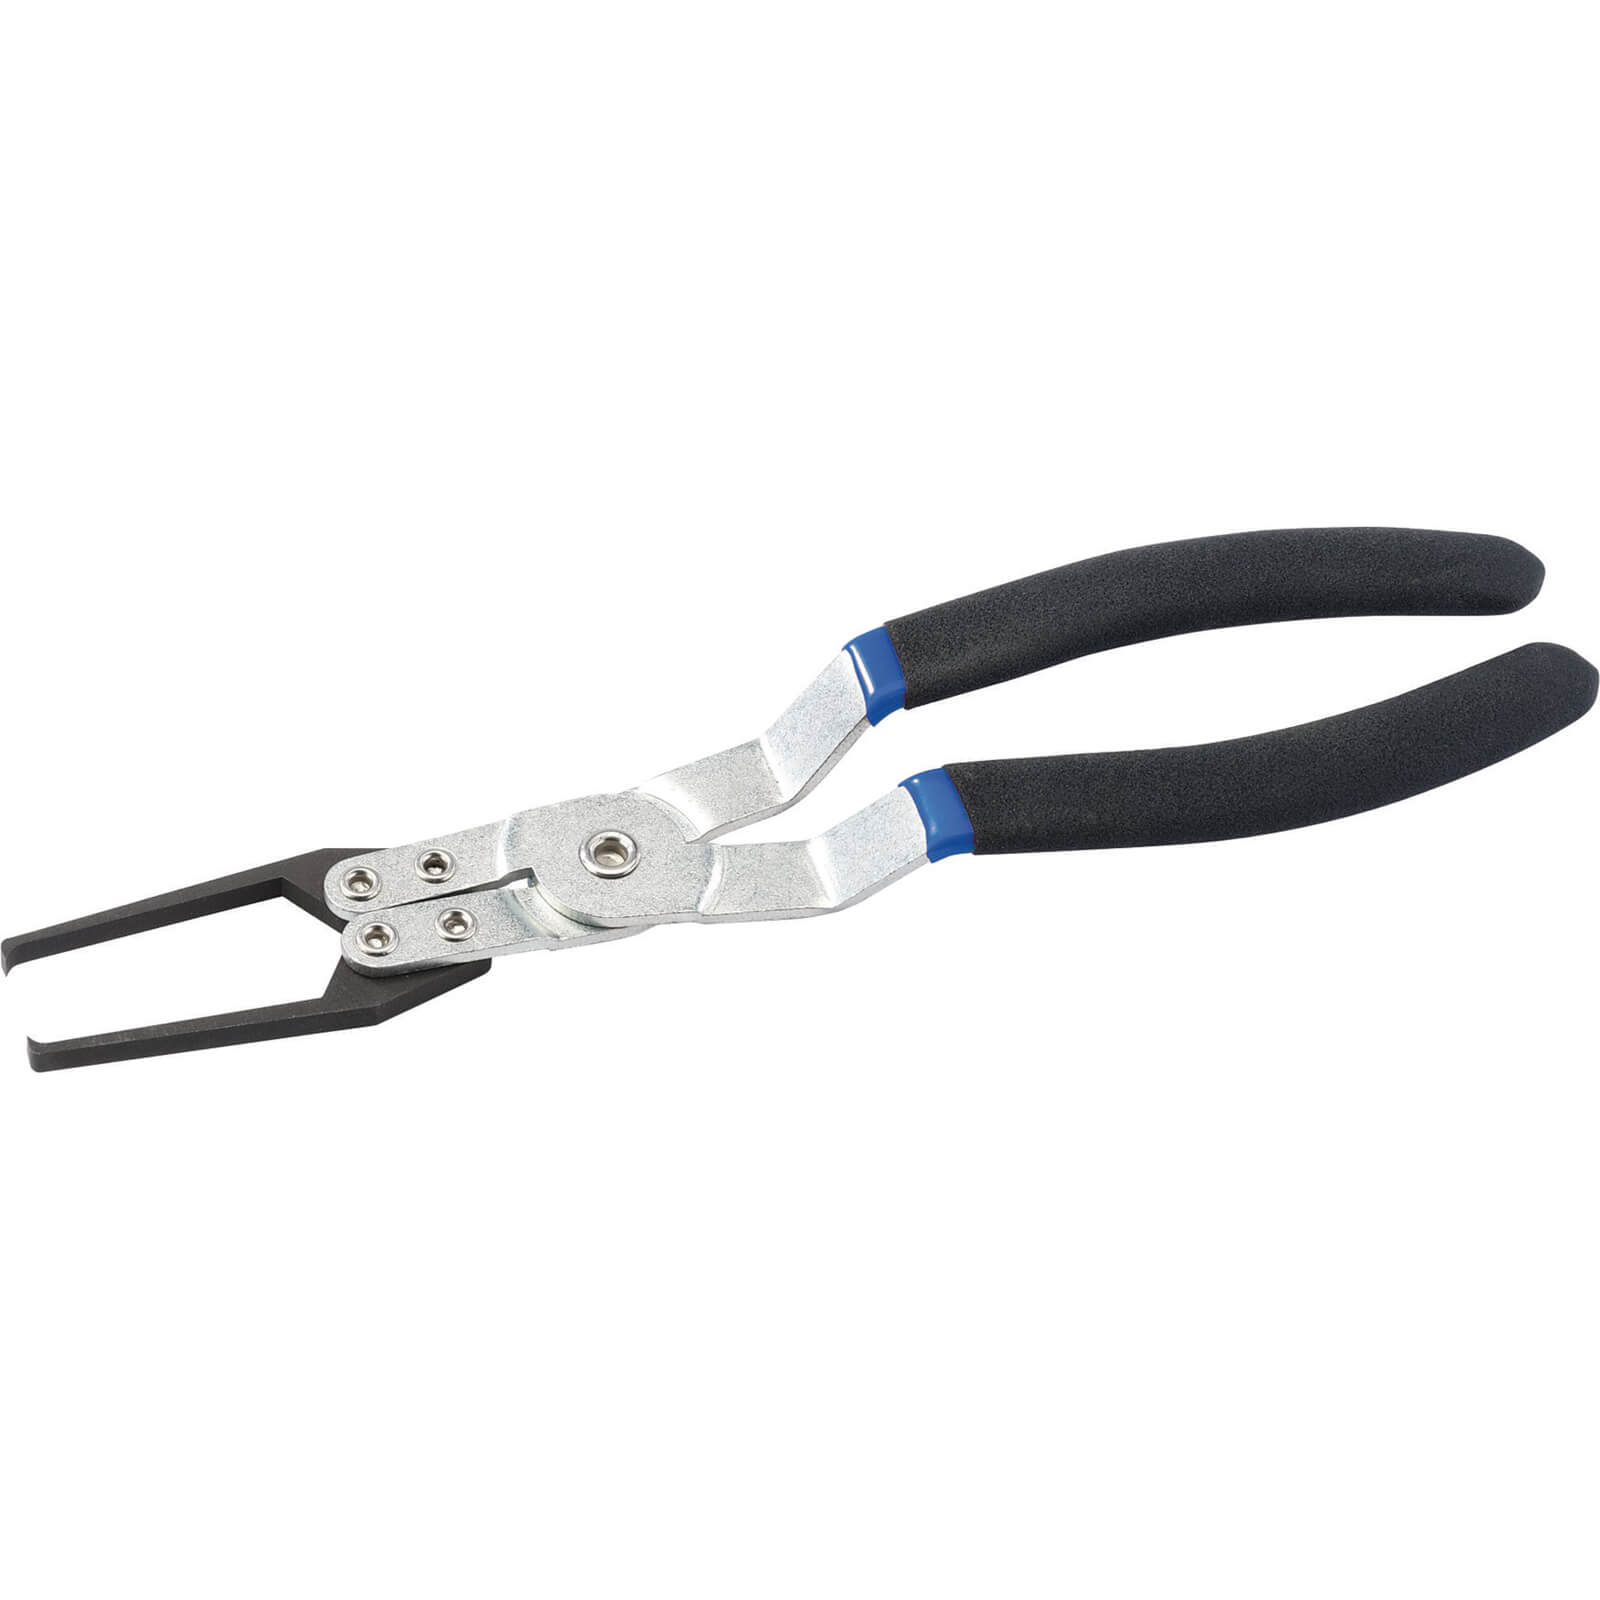 Image of Draper Automotive Relay Puller Pliers 220mm